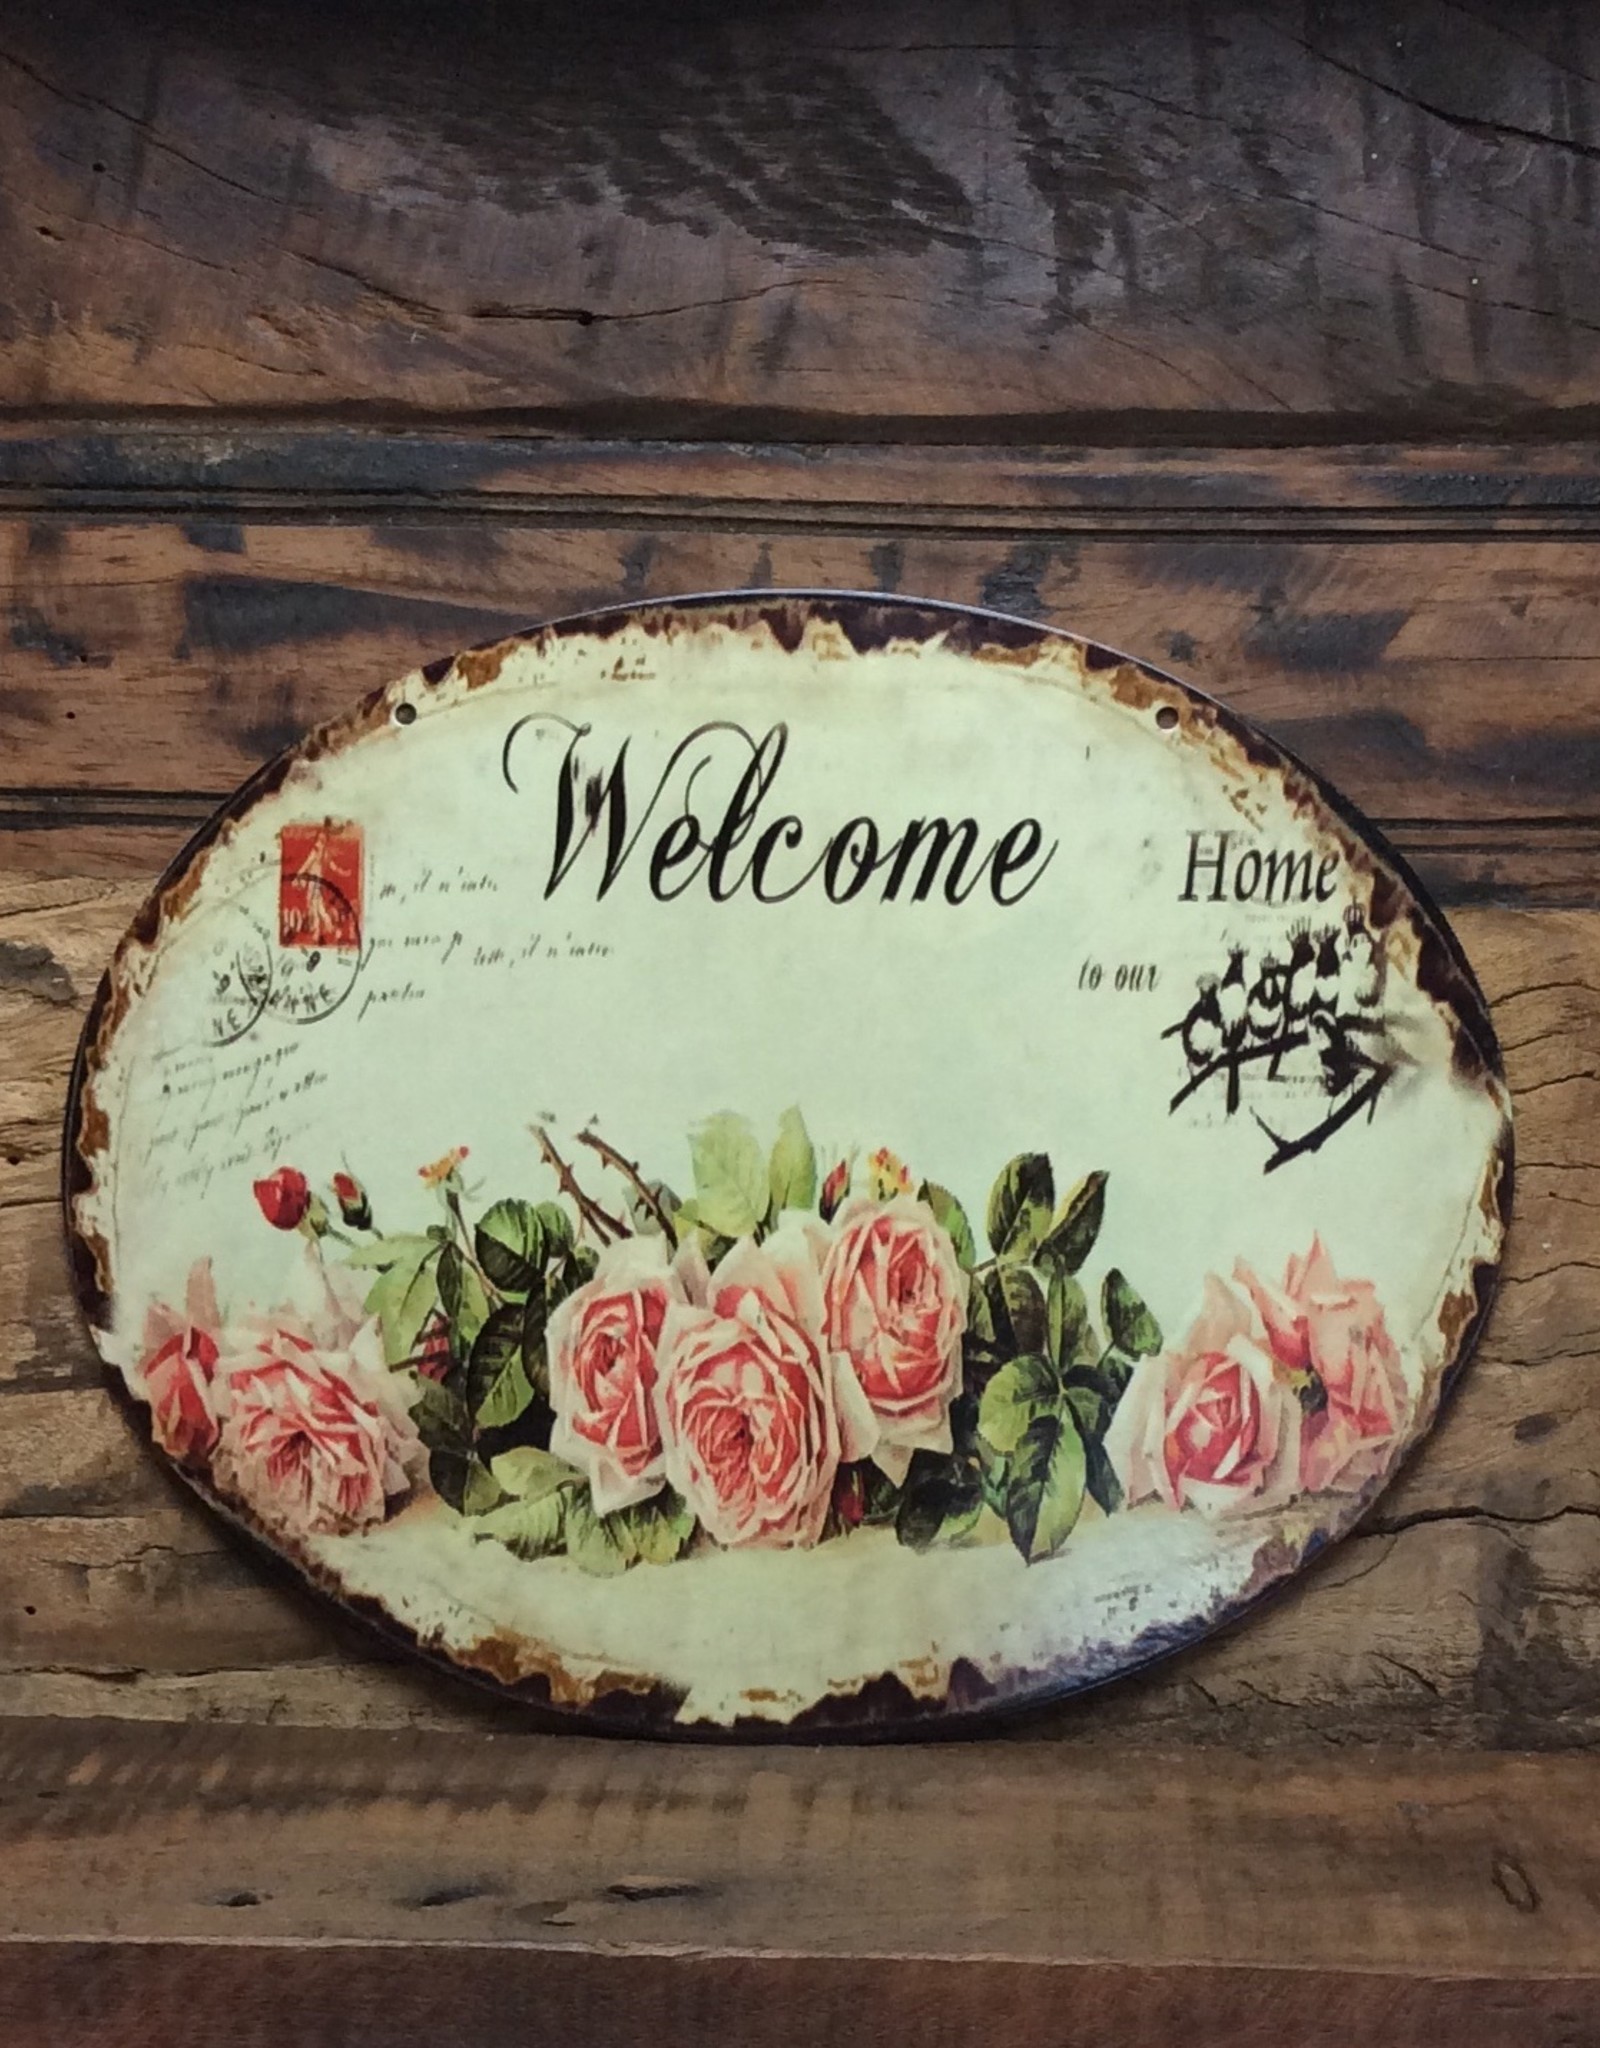 Tekstbord "Welcome to our Home"